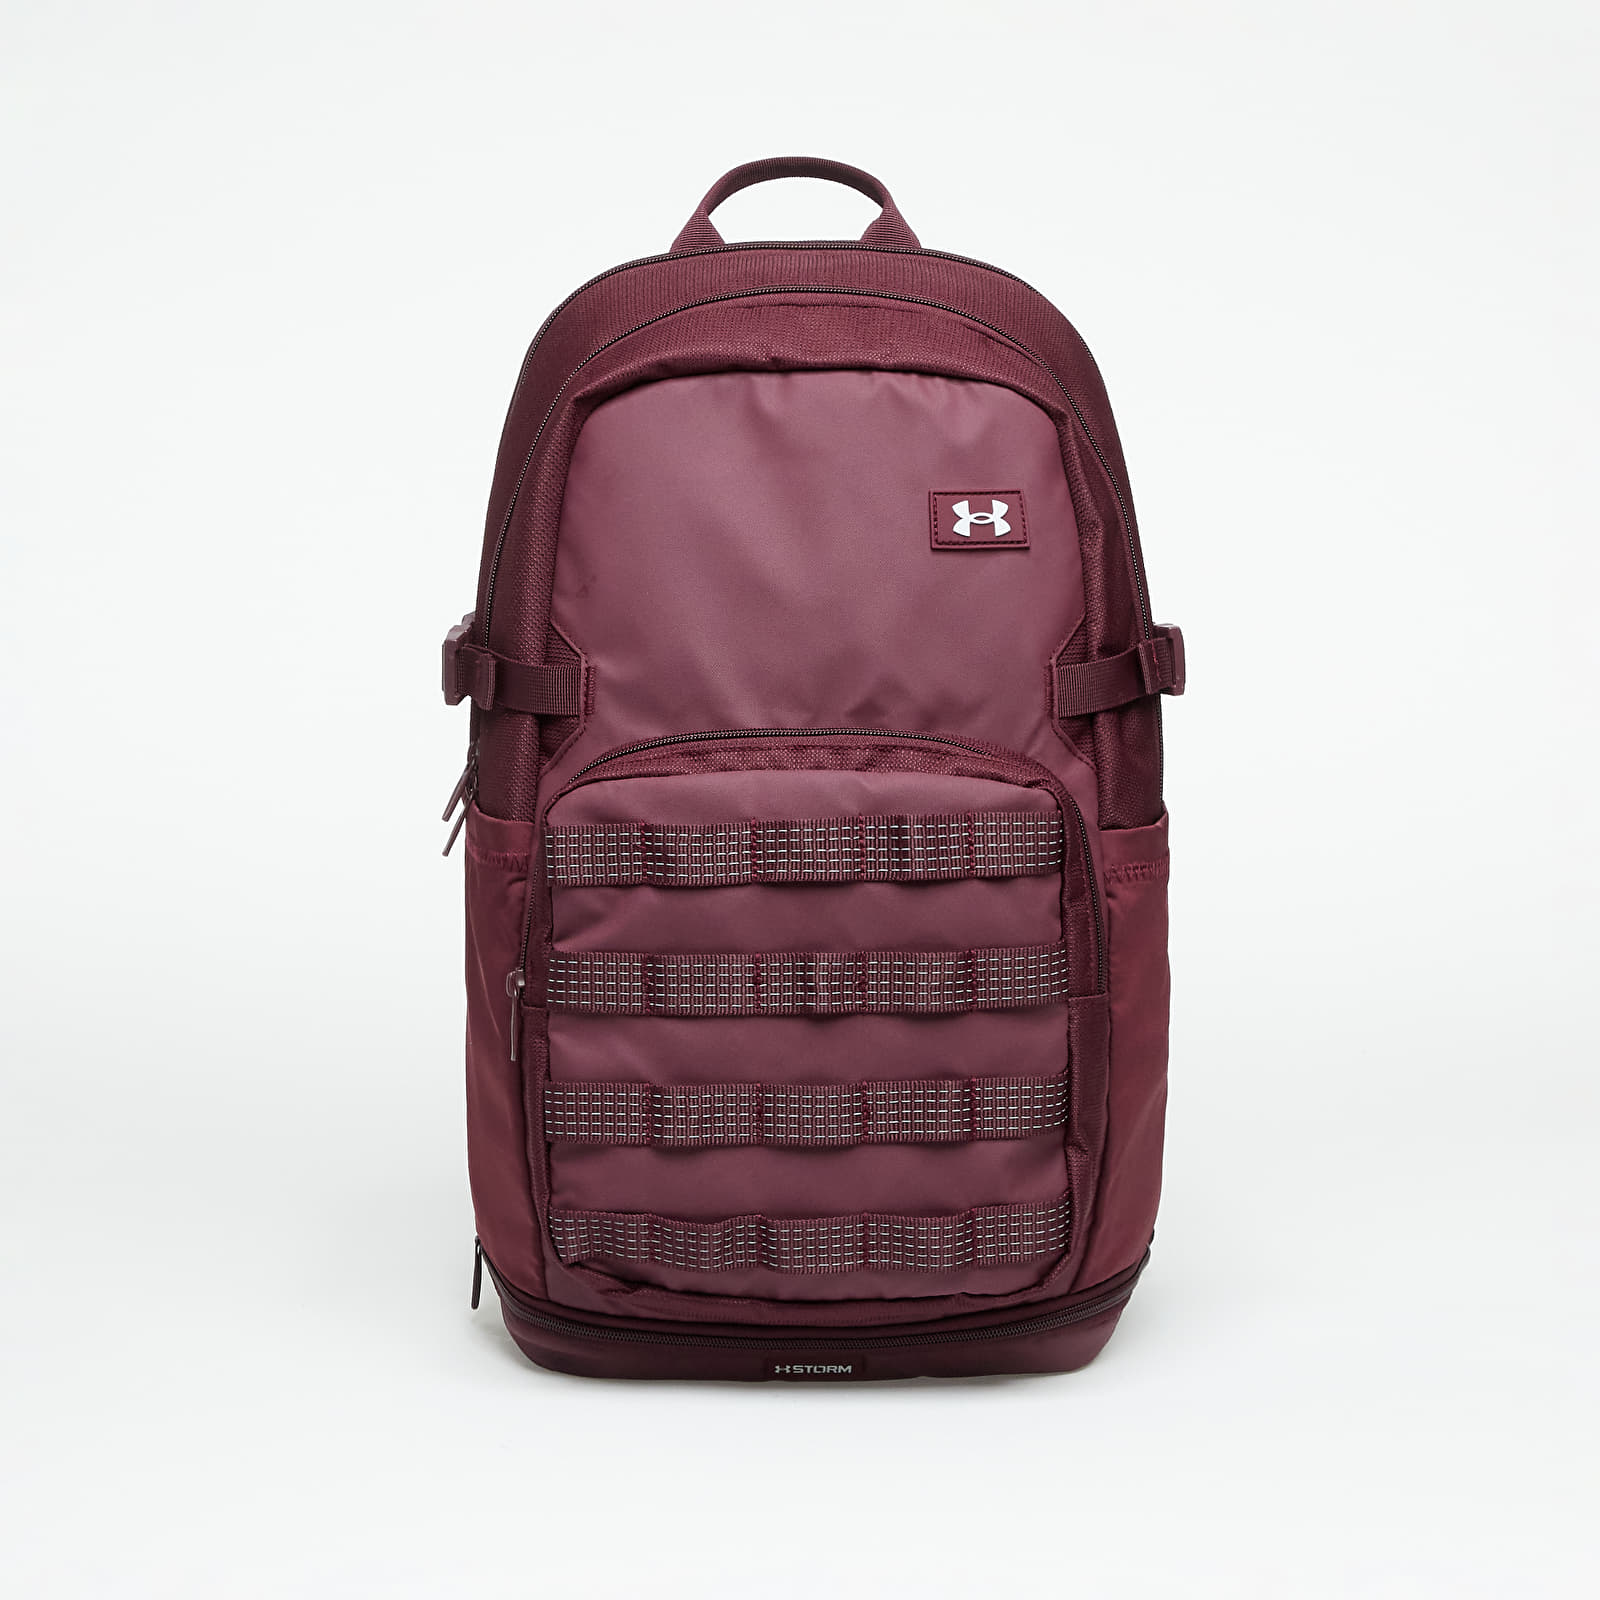 Under Armour - triumph sport backpack maroon